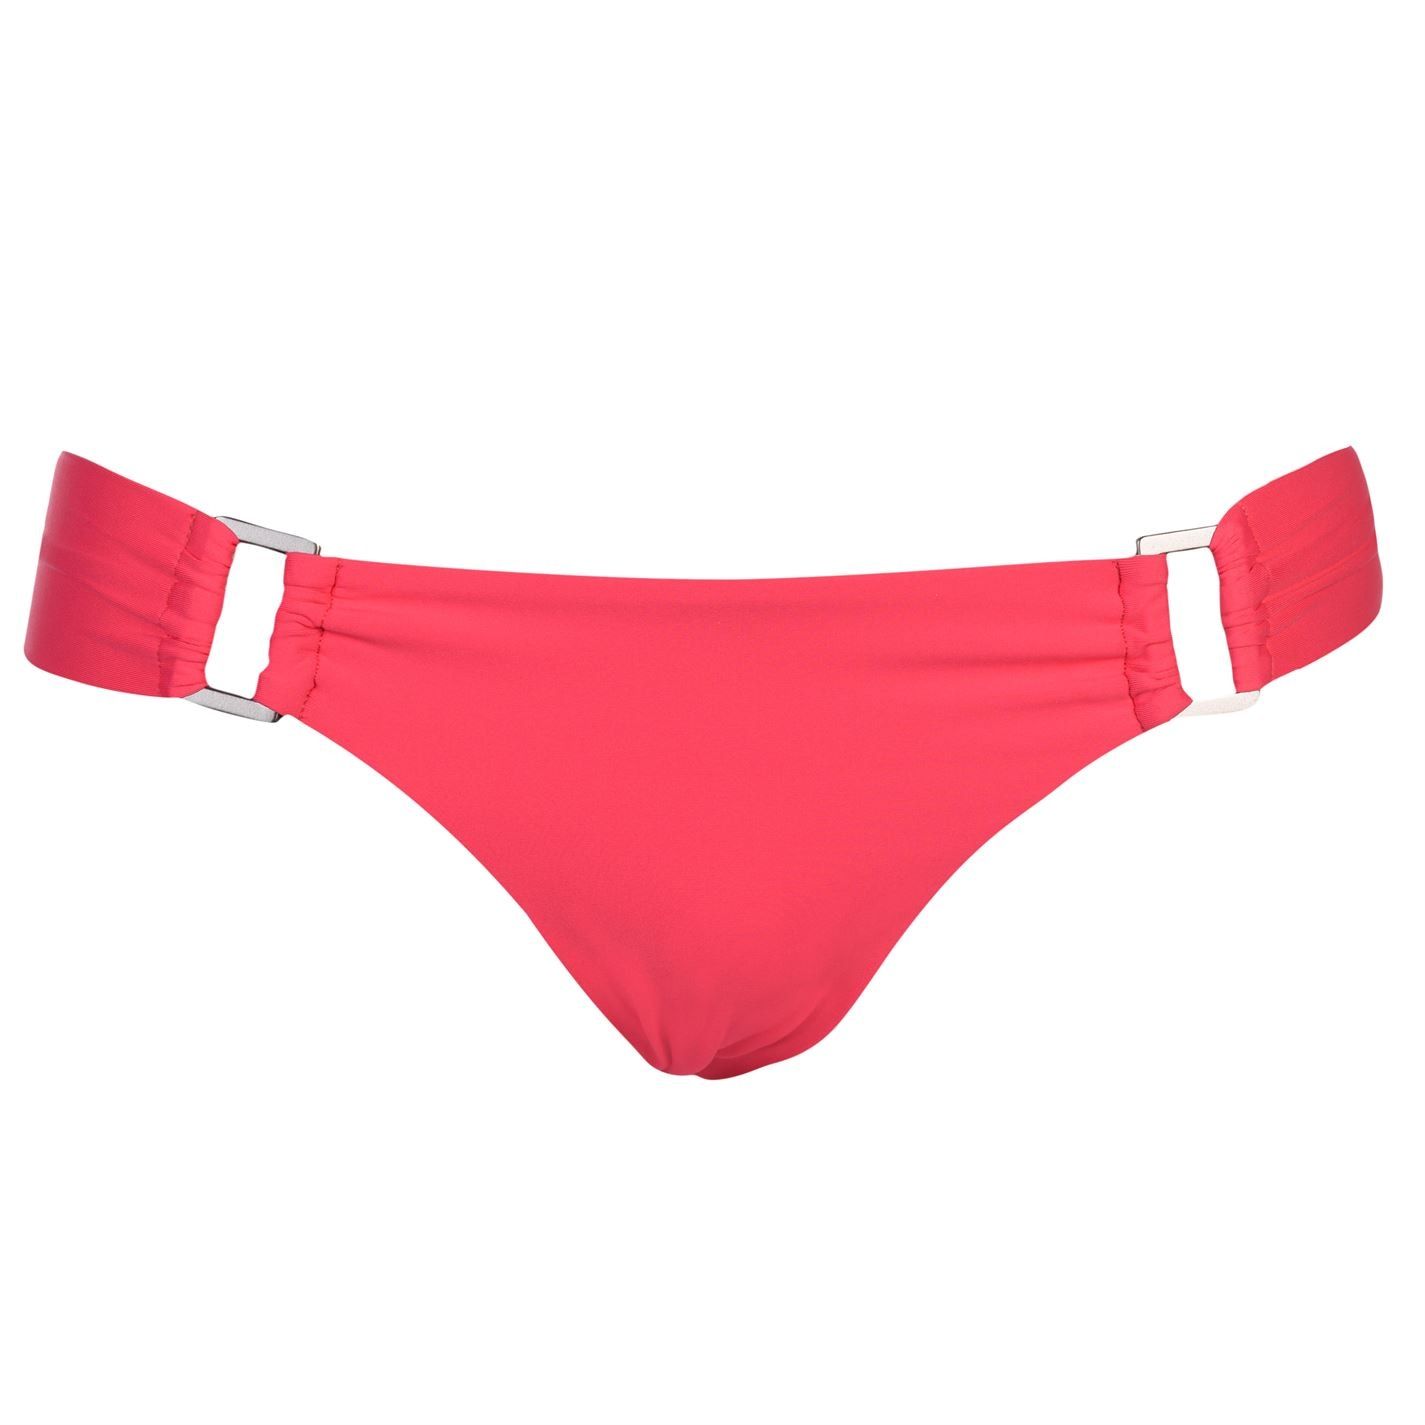 <h2> ONeill Hipfit Bikini Bottoms Ladies </h2>
These ONeill Hipfit Bikini Bottoms are designed with an elasticated waistband and hidden seams. They have metal detail to the waist for a stylish look and are a lightweight construction. These bottoms are fully chlorine resistant in a block colour and are complete with ONeill branding.

> Bikini bottoms
> Elasticated waistband
> Hidden seams
> Metal detail to waist
> Lightweight
> Chlorine resistant
> Block colour
> ONeill branding
> Shell: 87% polyamide, 13% elastane
> Lining: 100% polyester
> Machine washable
> Keep away from fire